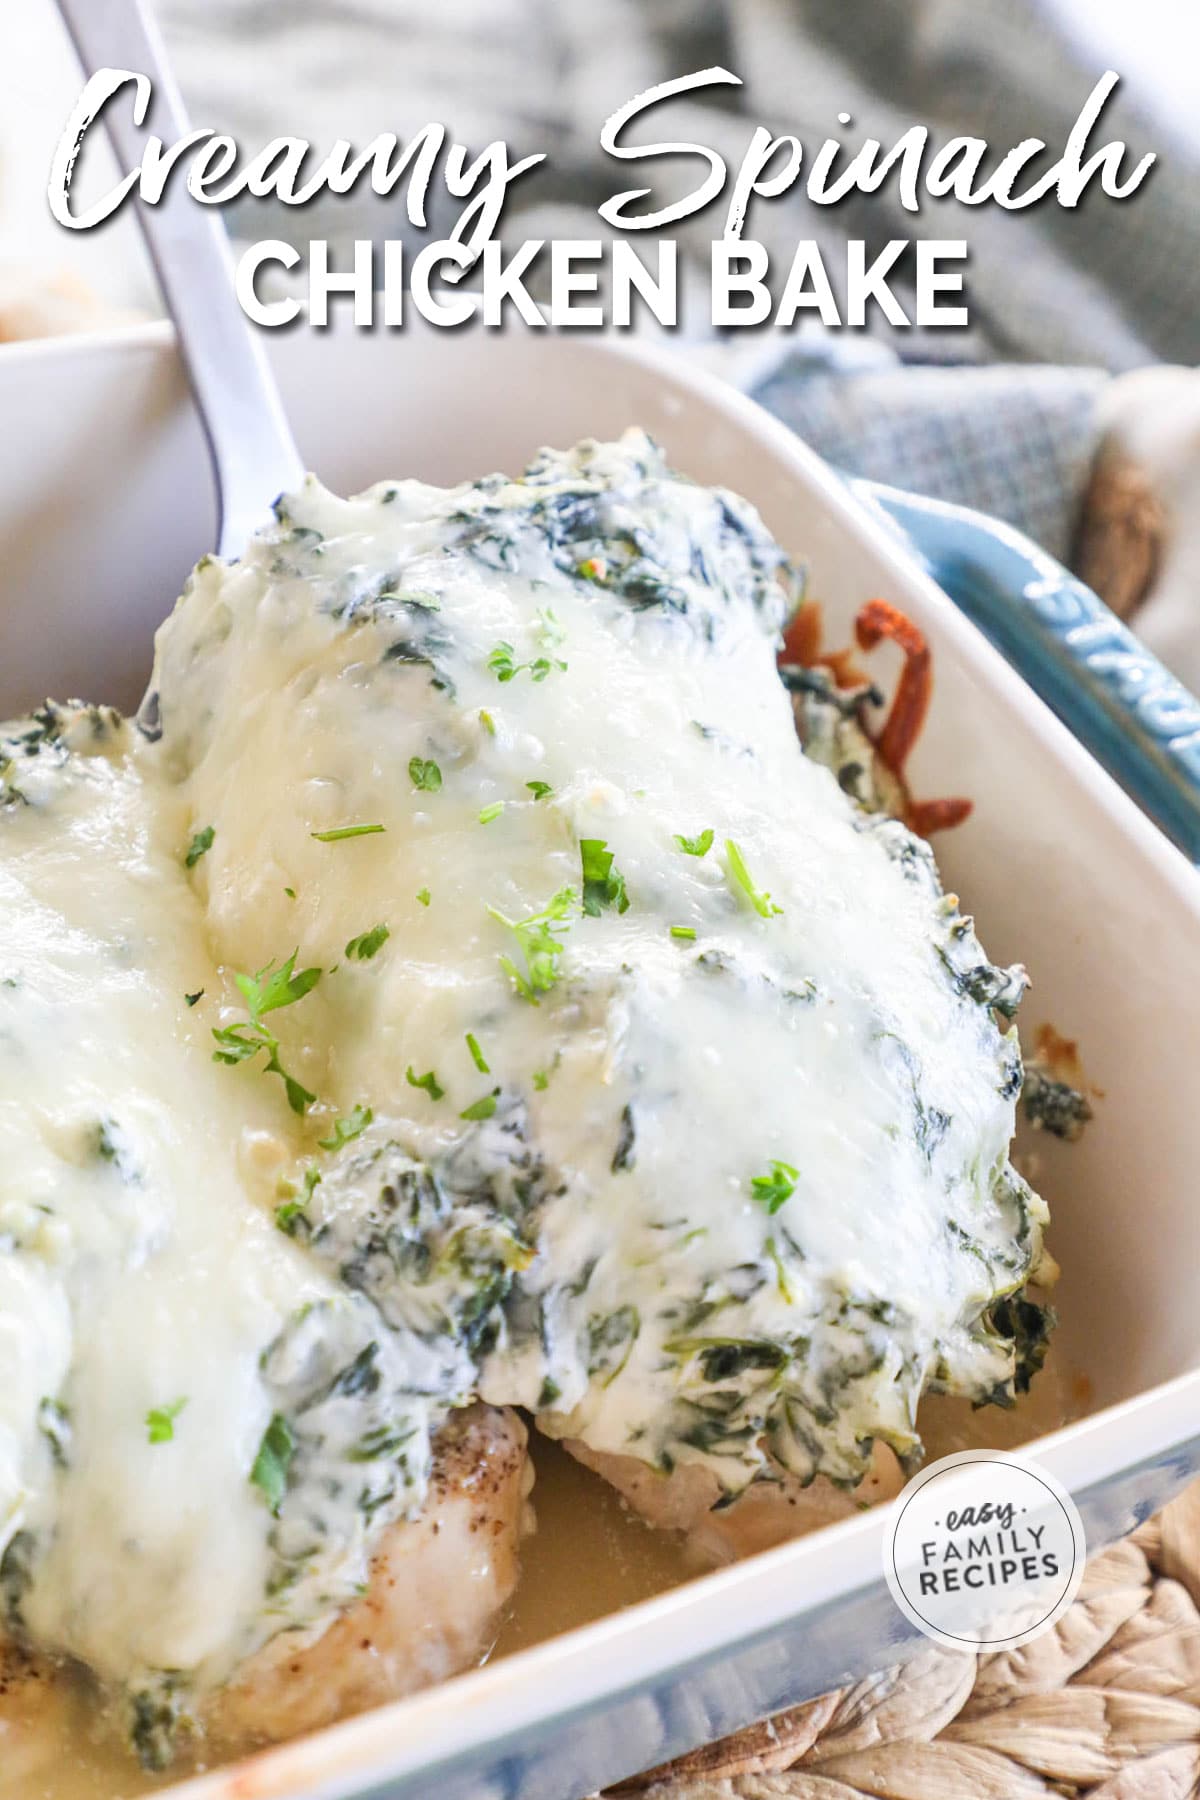 Creamy, cheesy chicken and spinach baked in a casserole dish